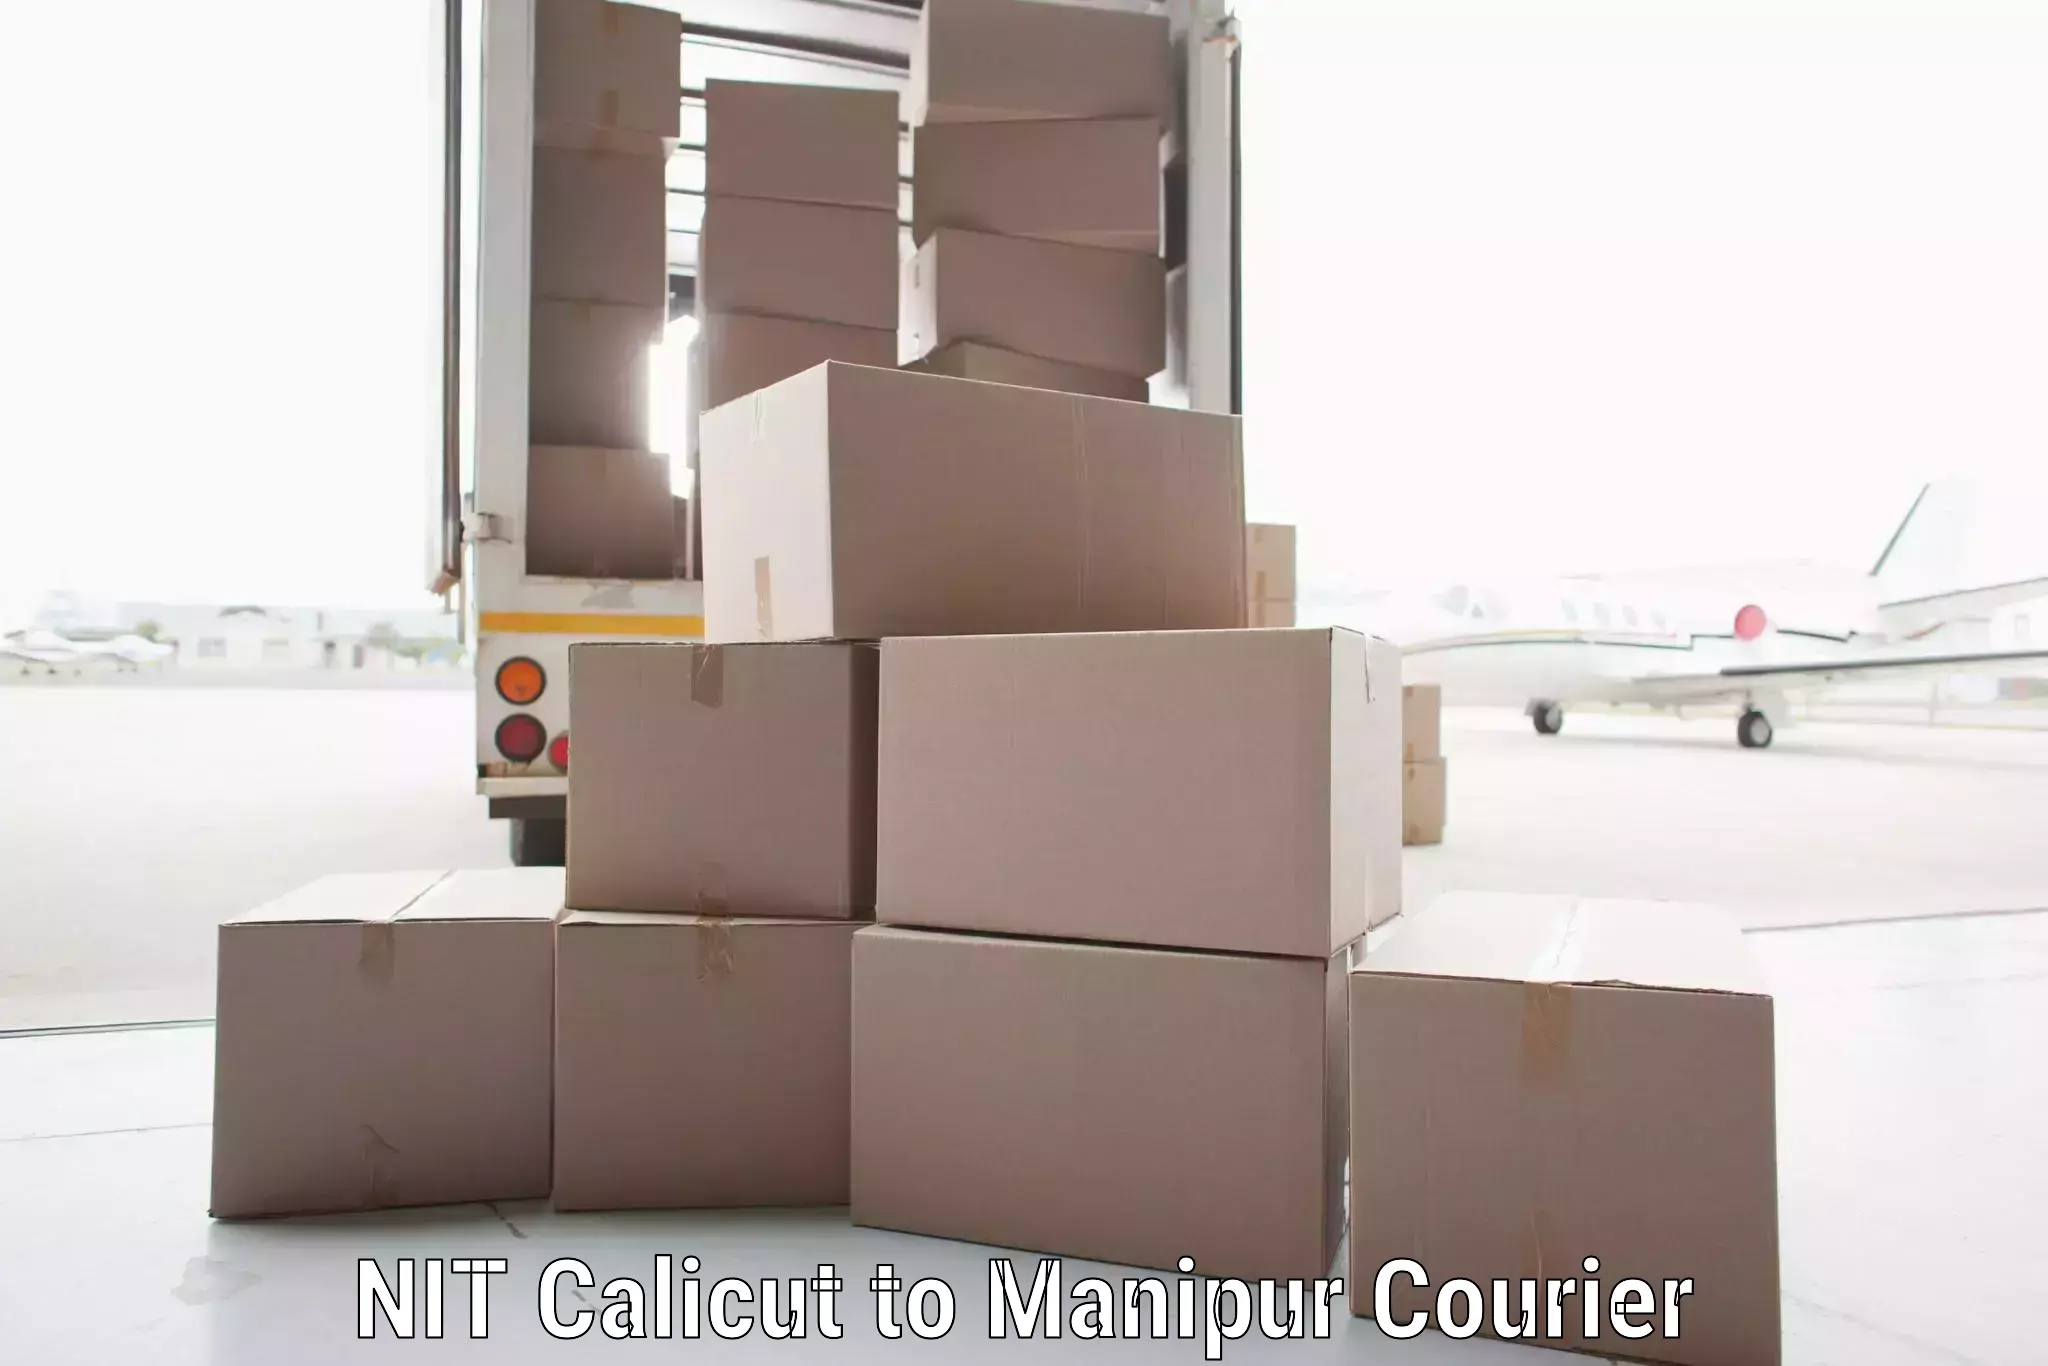 Local delivery service NIT Calicut to NIT Manipur